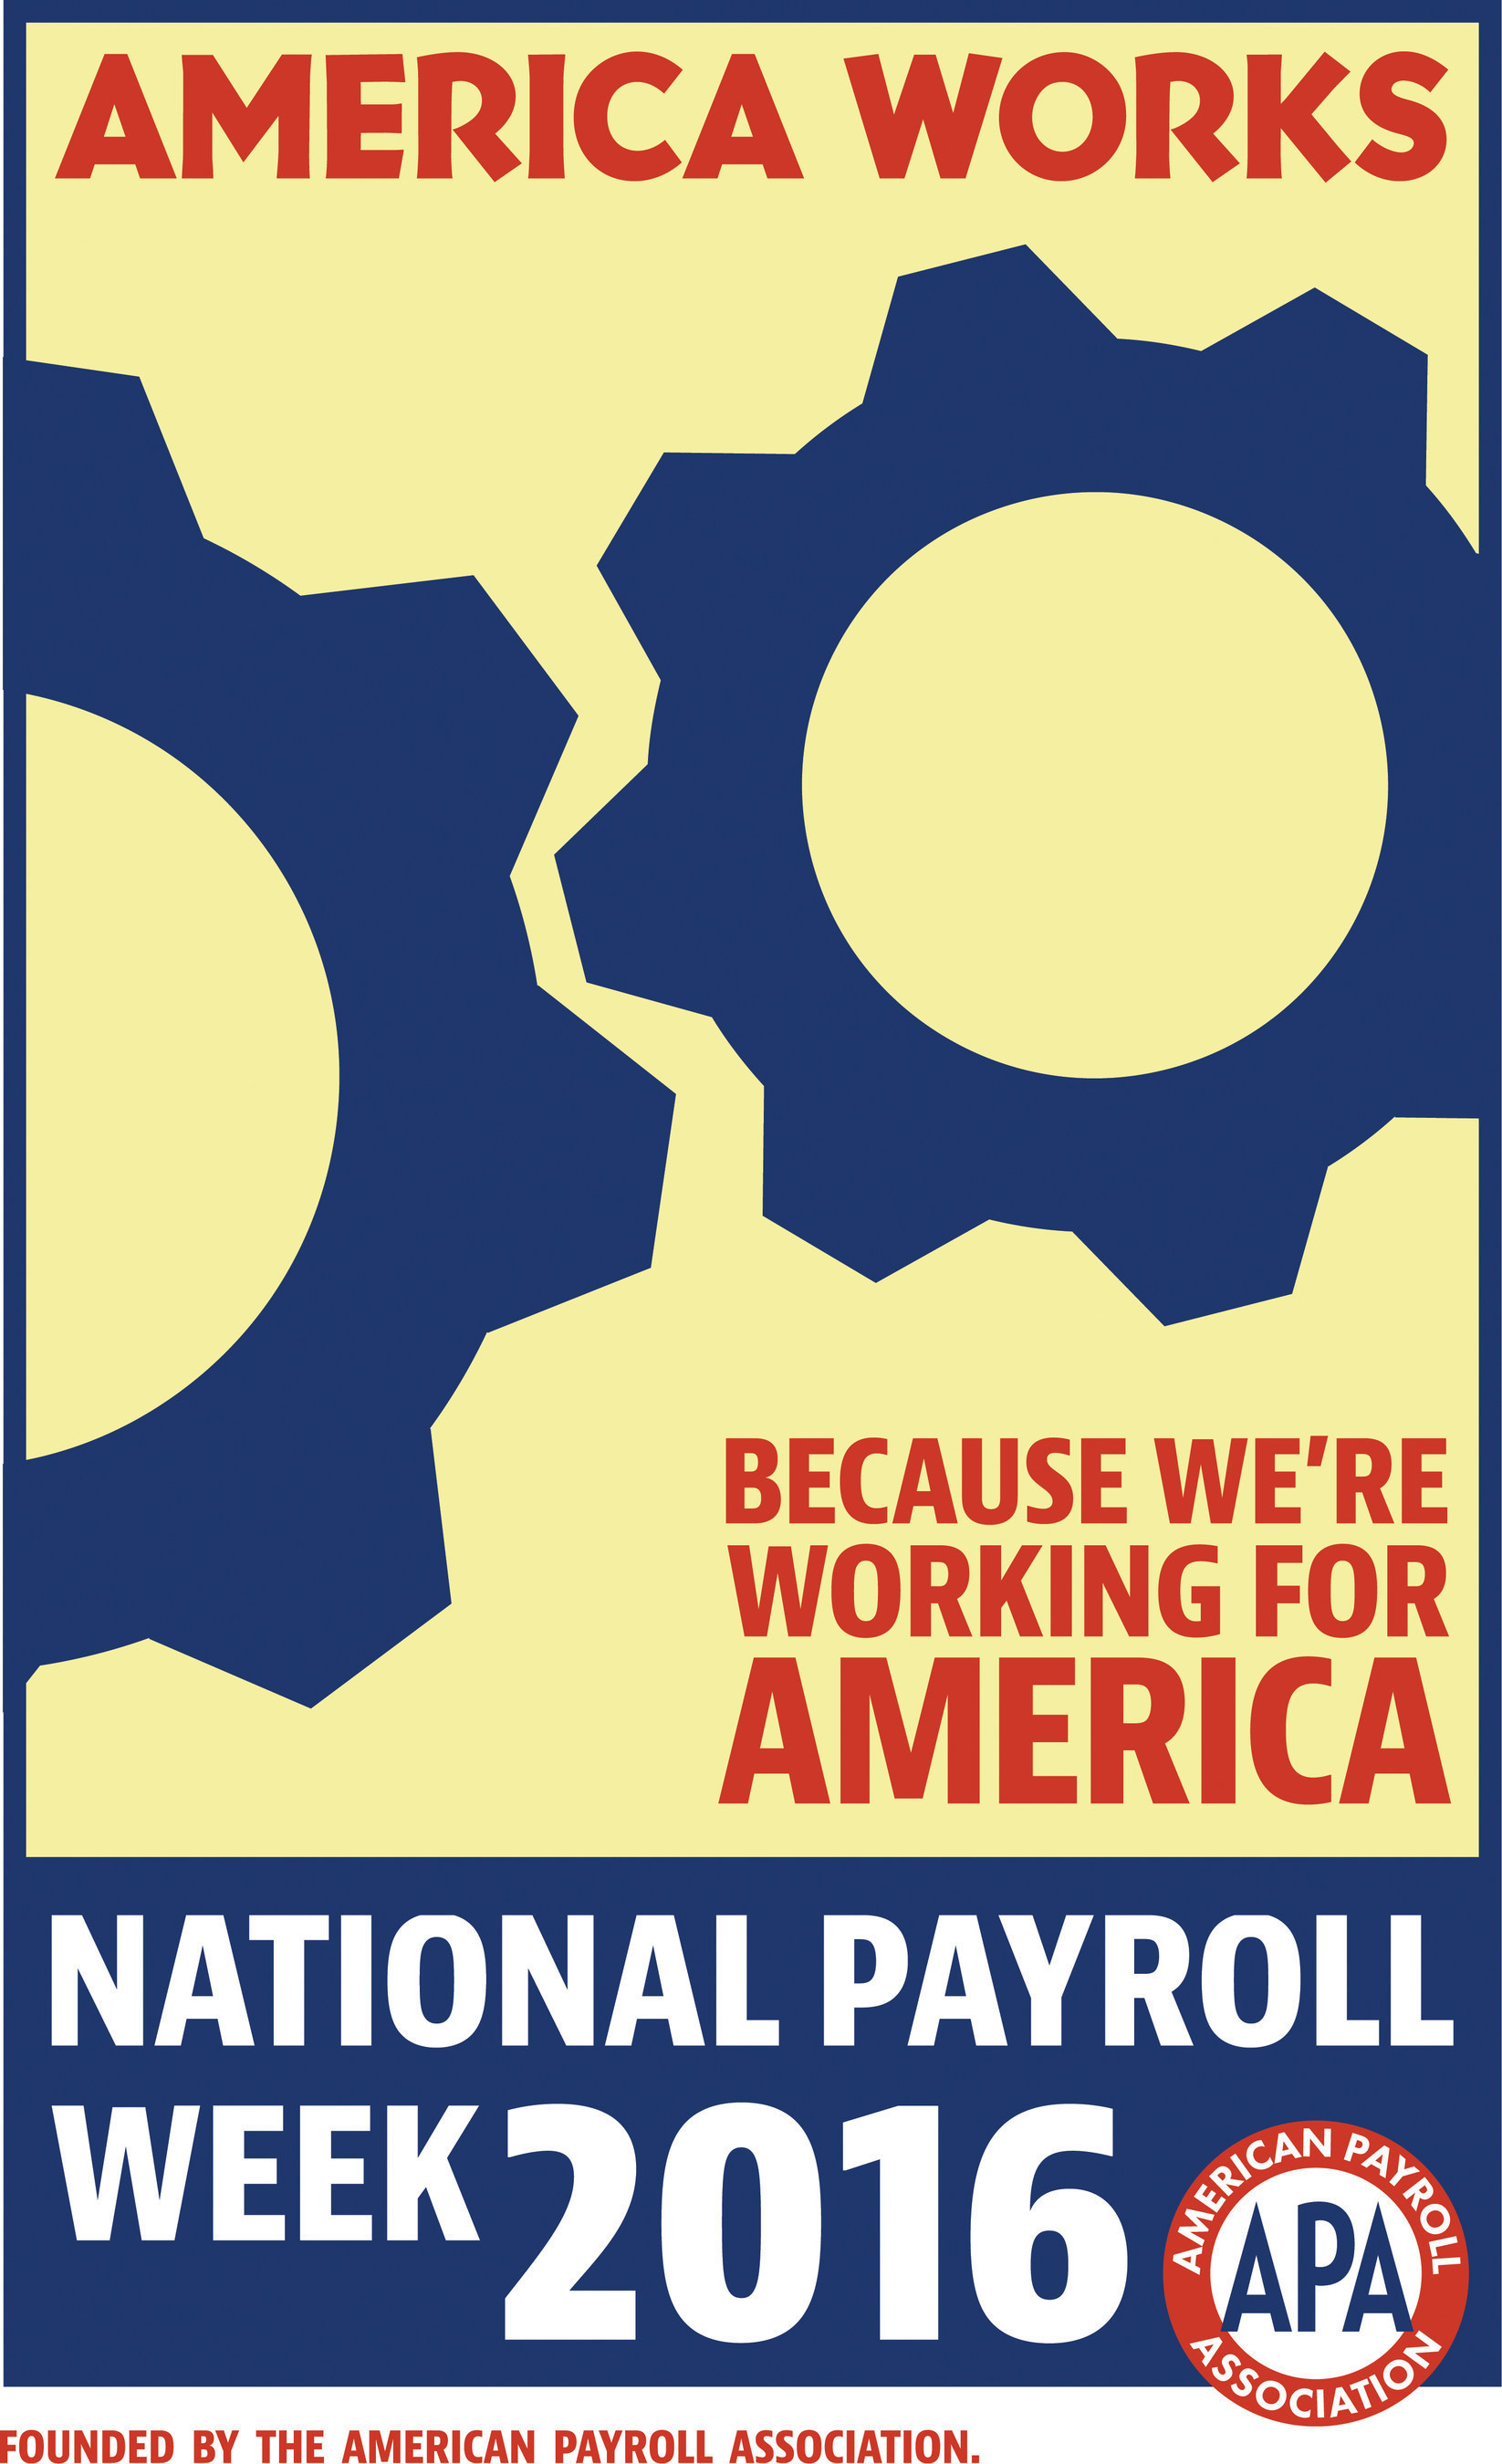 National Payroll Week celebrates the hard work by America's 150 million wage earners and the payroll professionals who pay them. Together, through the payroll withholding system, they contribute, collect, report and deposit approximately $2.2 trillion, or 67%, of the annual revenue of the U.S. Treasury. Visit www.nationalpayrollweek.com for tips to stretch your paycheck.